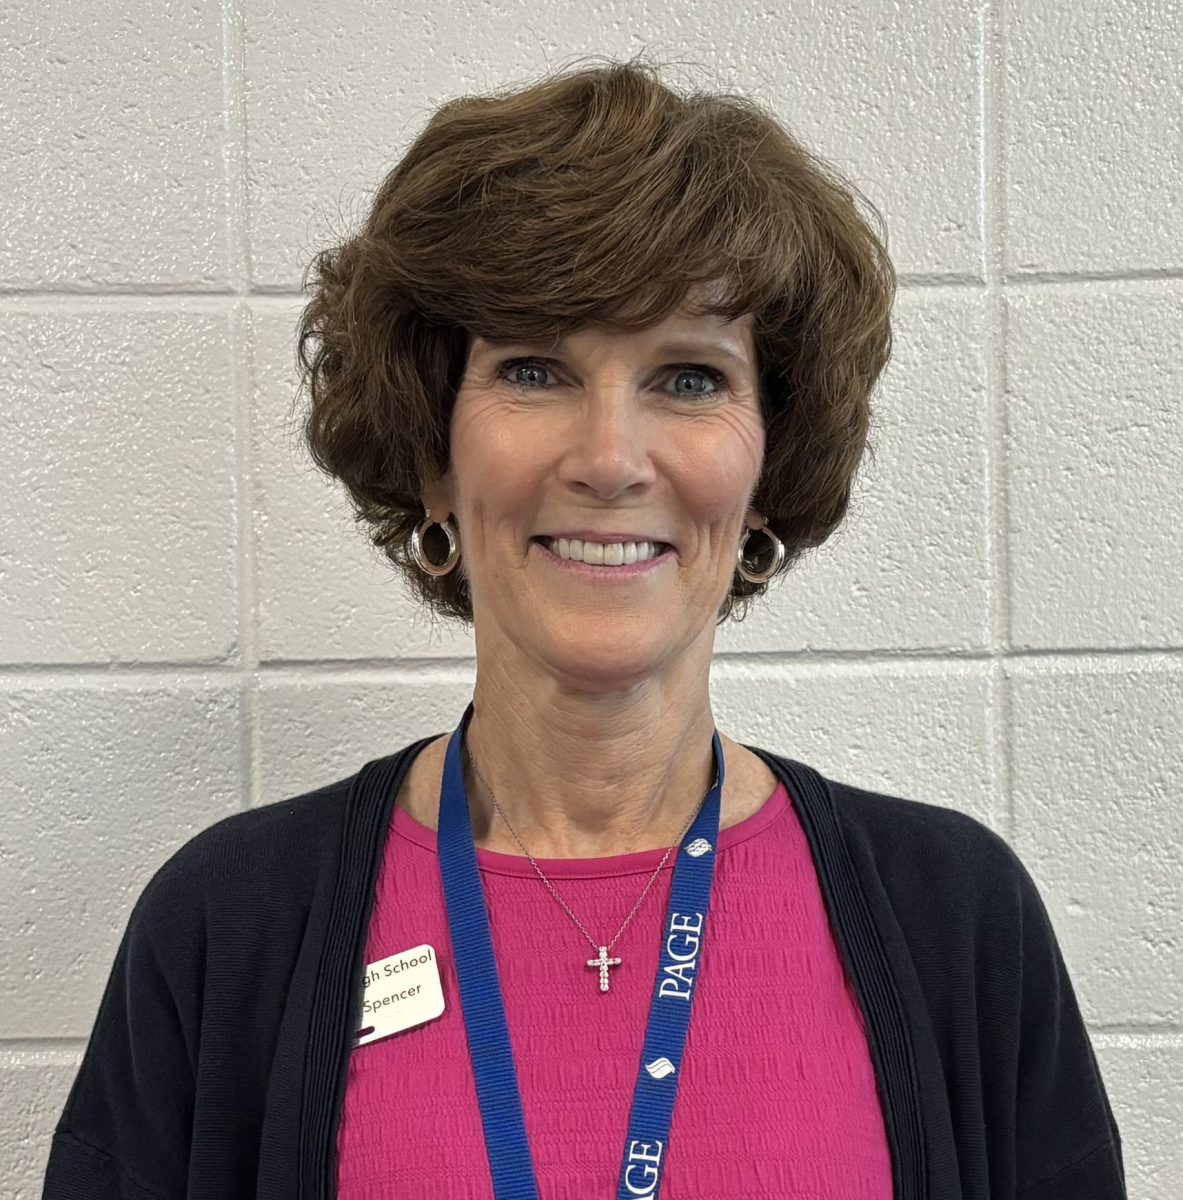 Julie Spencer teaches gifted Algebra II, Algebra II, accelerated geometry, and advanced Algebra. Spencer has been part of the Panther family for 23 years. Spencer enjoys watching her students grow and becoming better versions of themselves at the end of the school year.